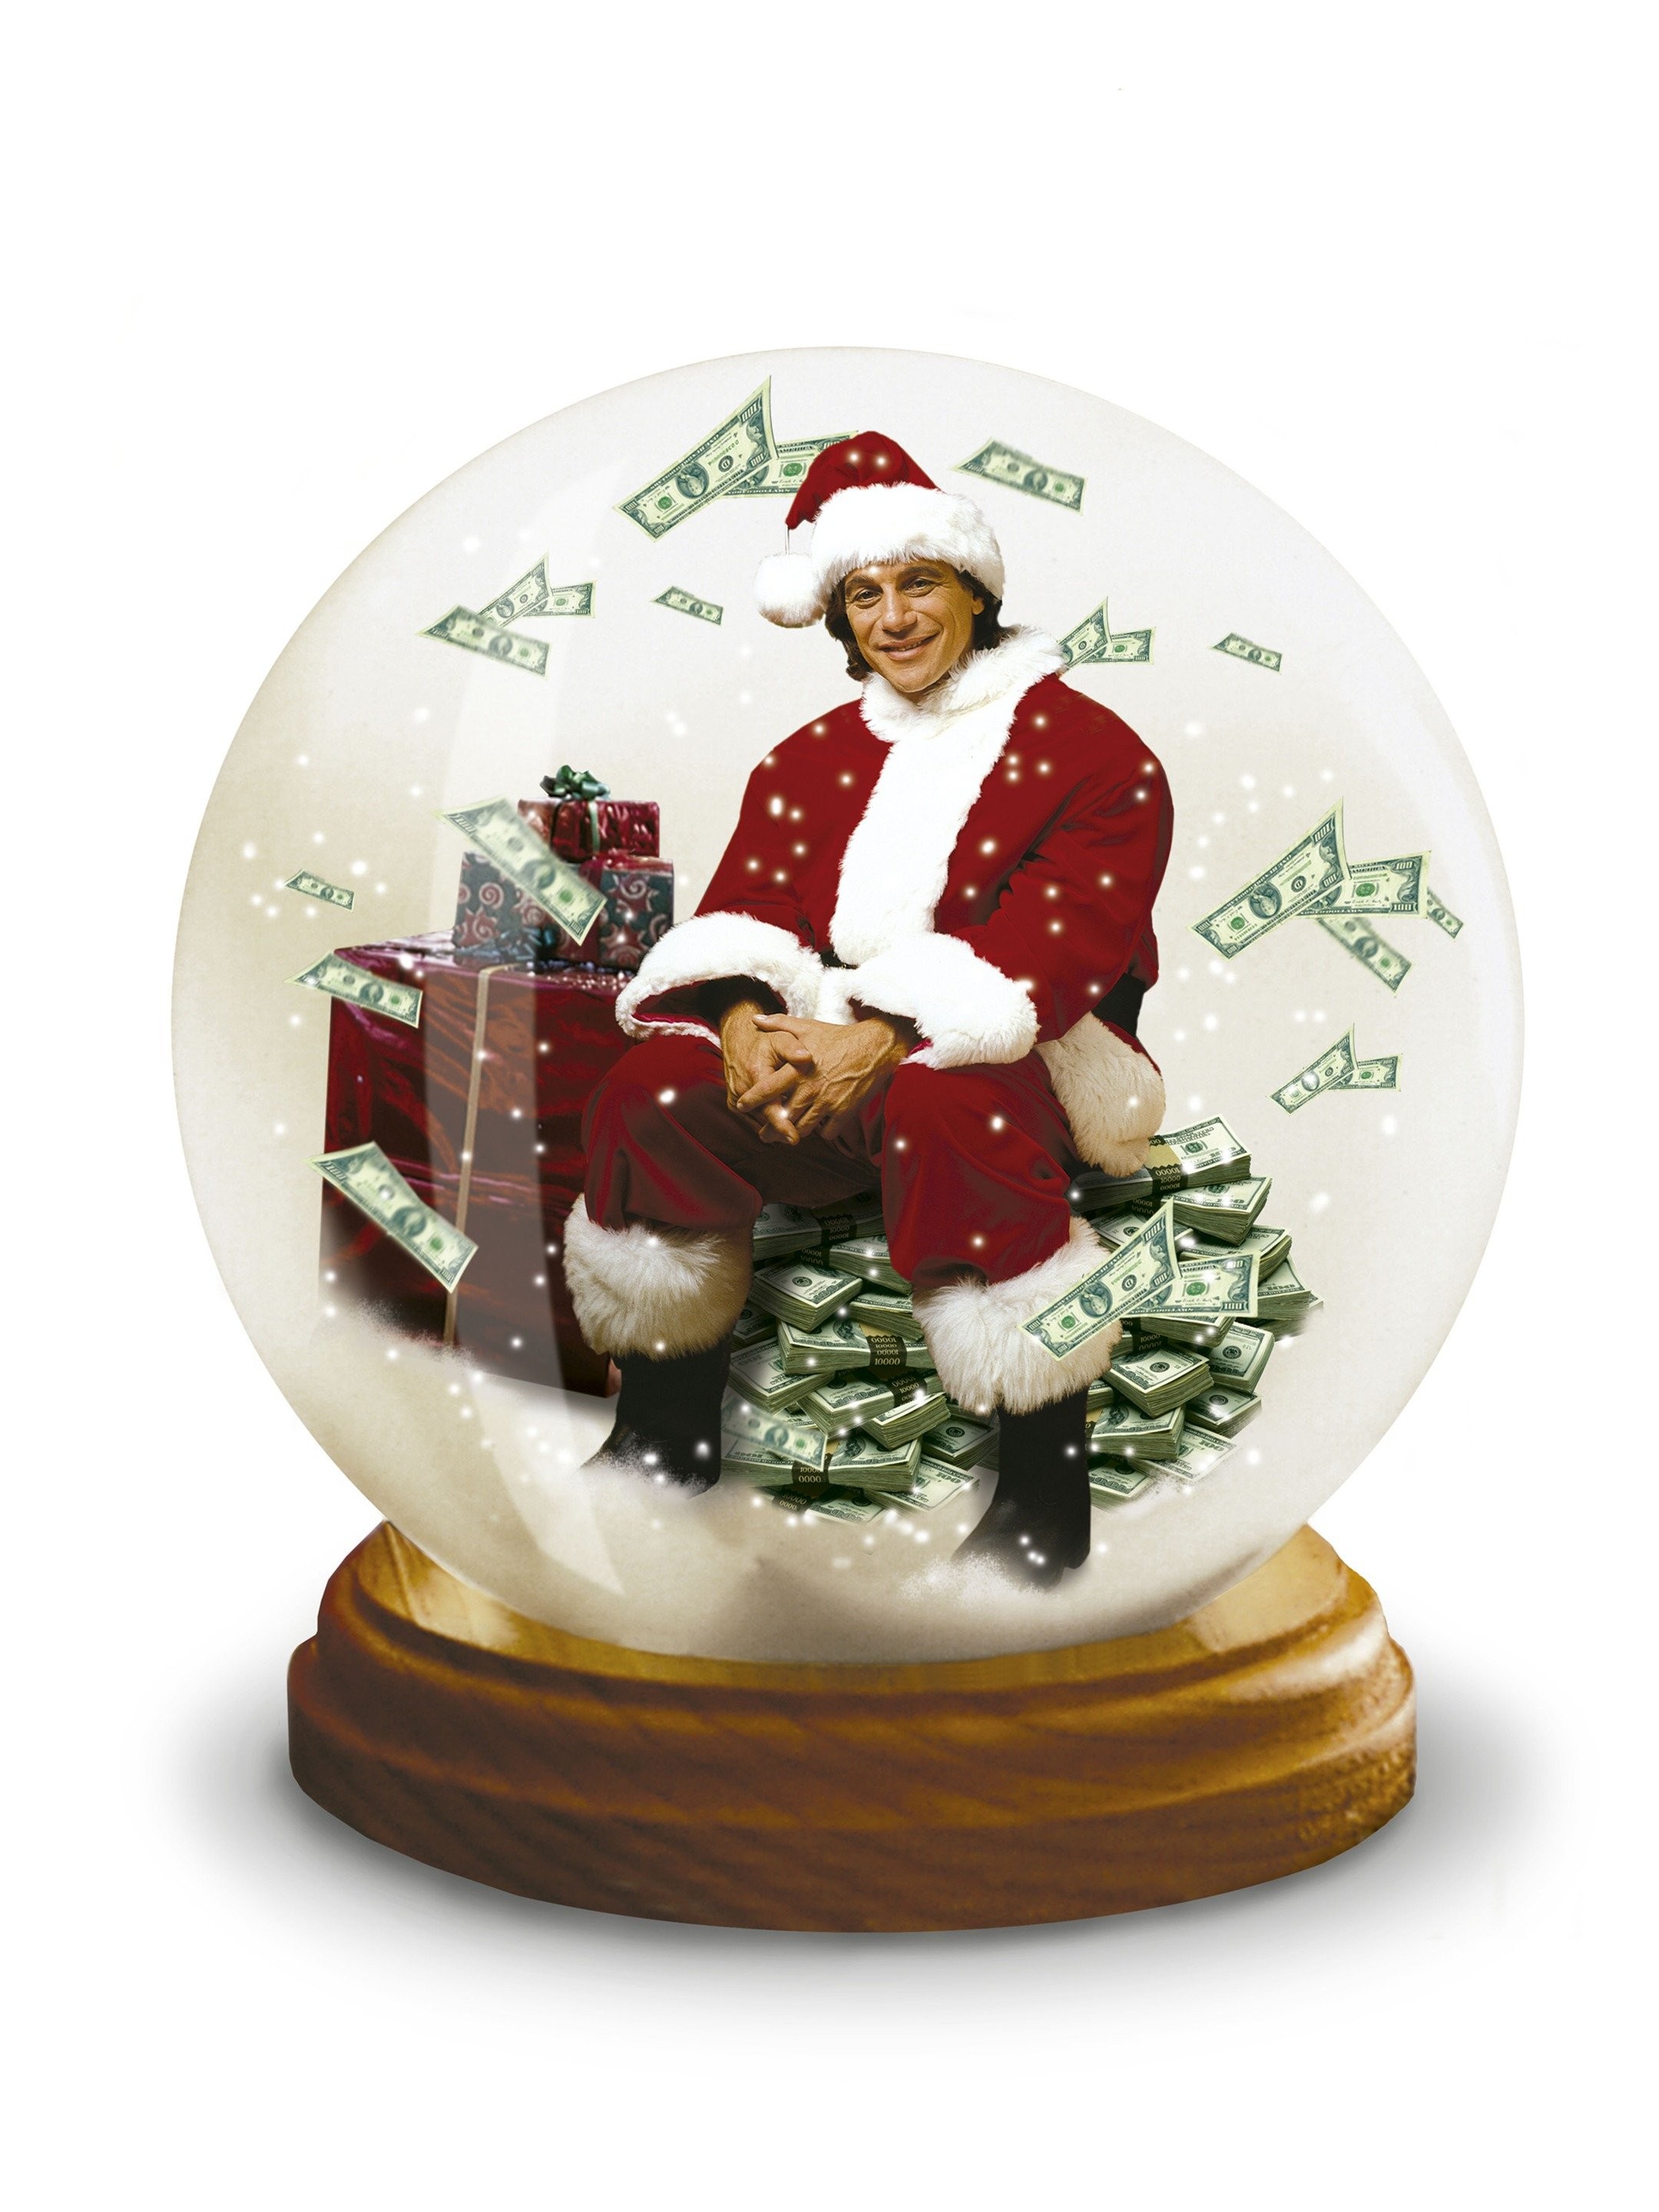 A Snow Globe Christmas - Rotten Tomatoes